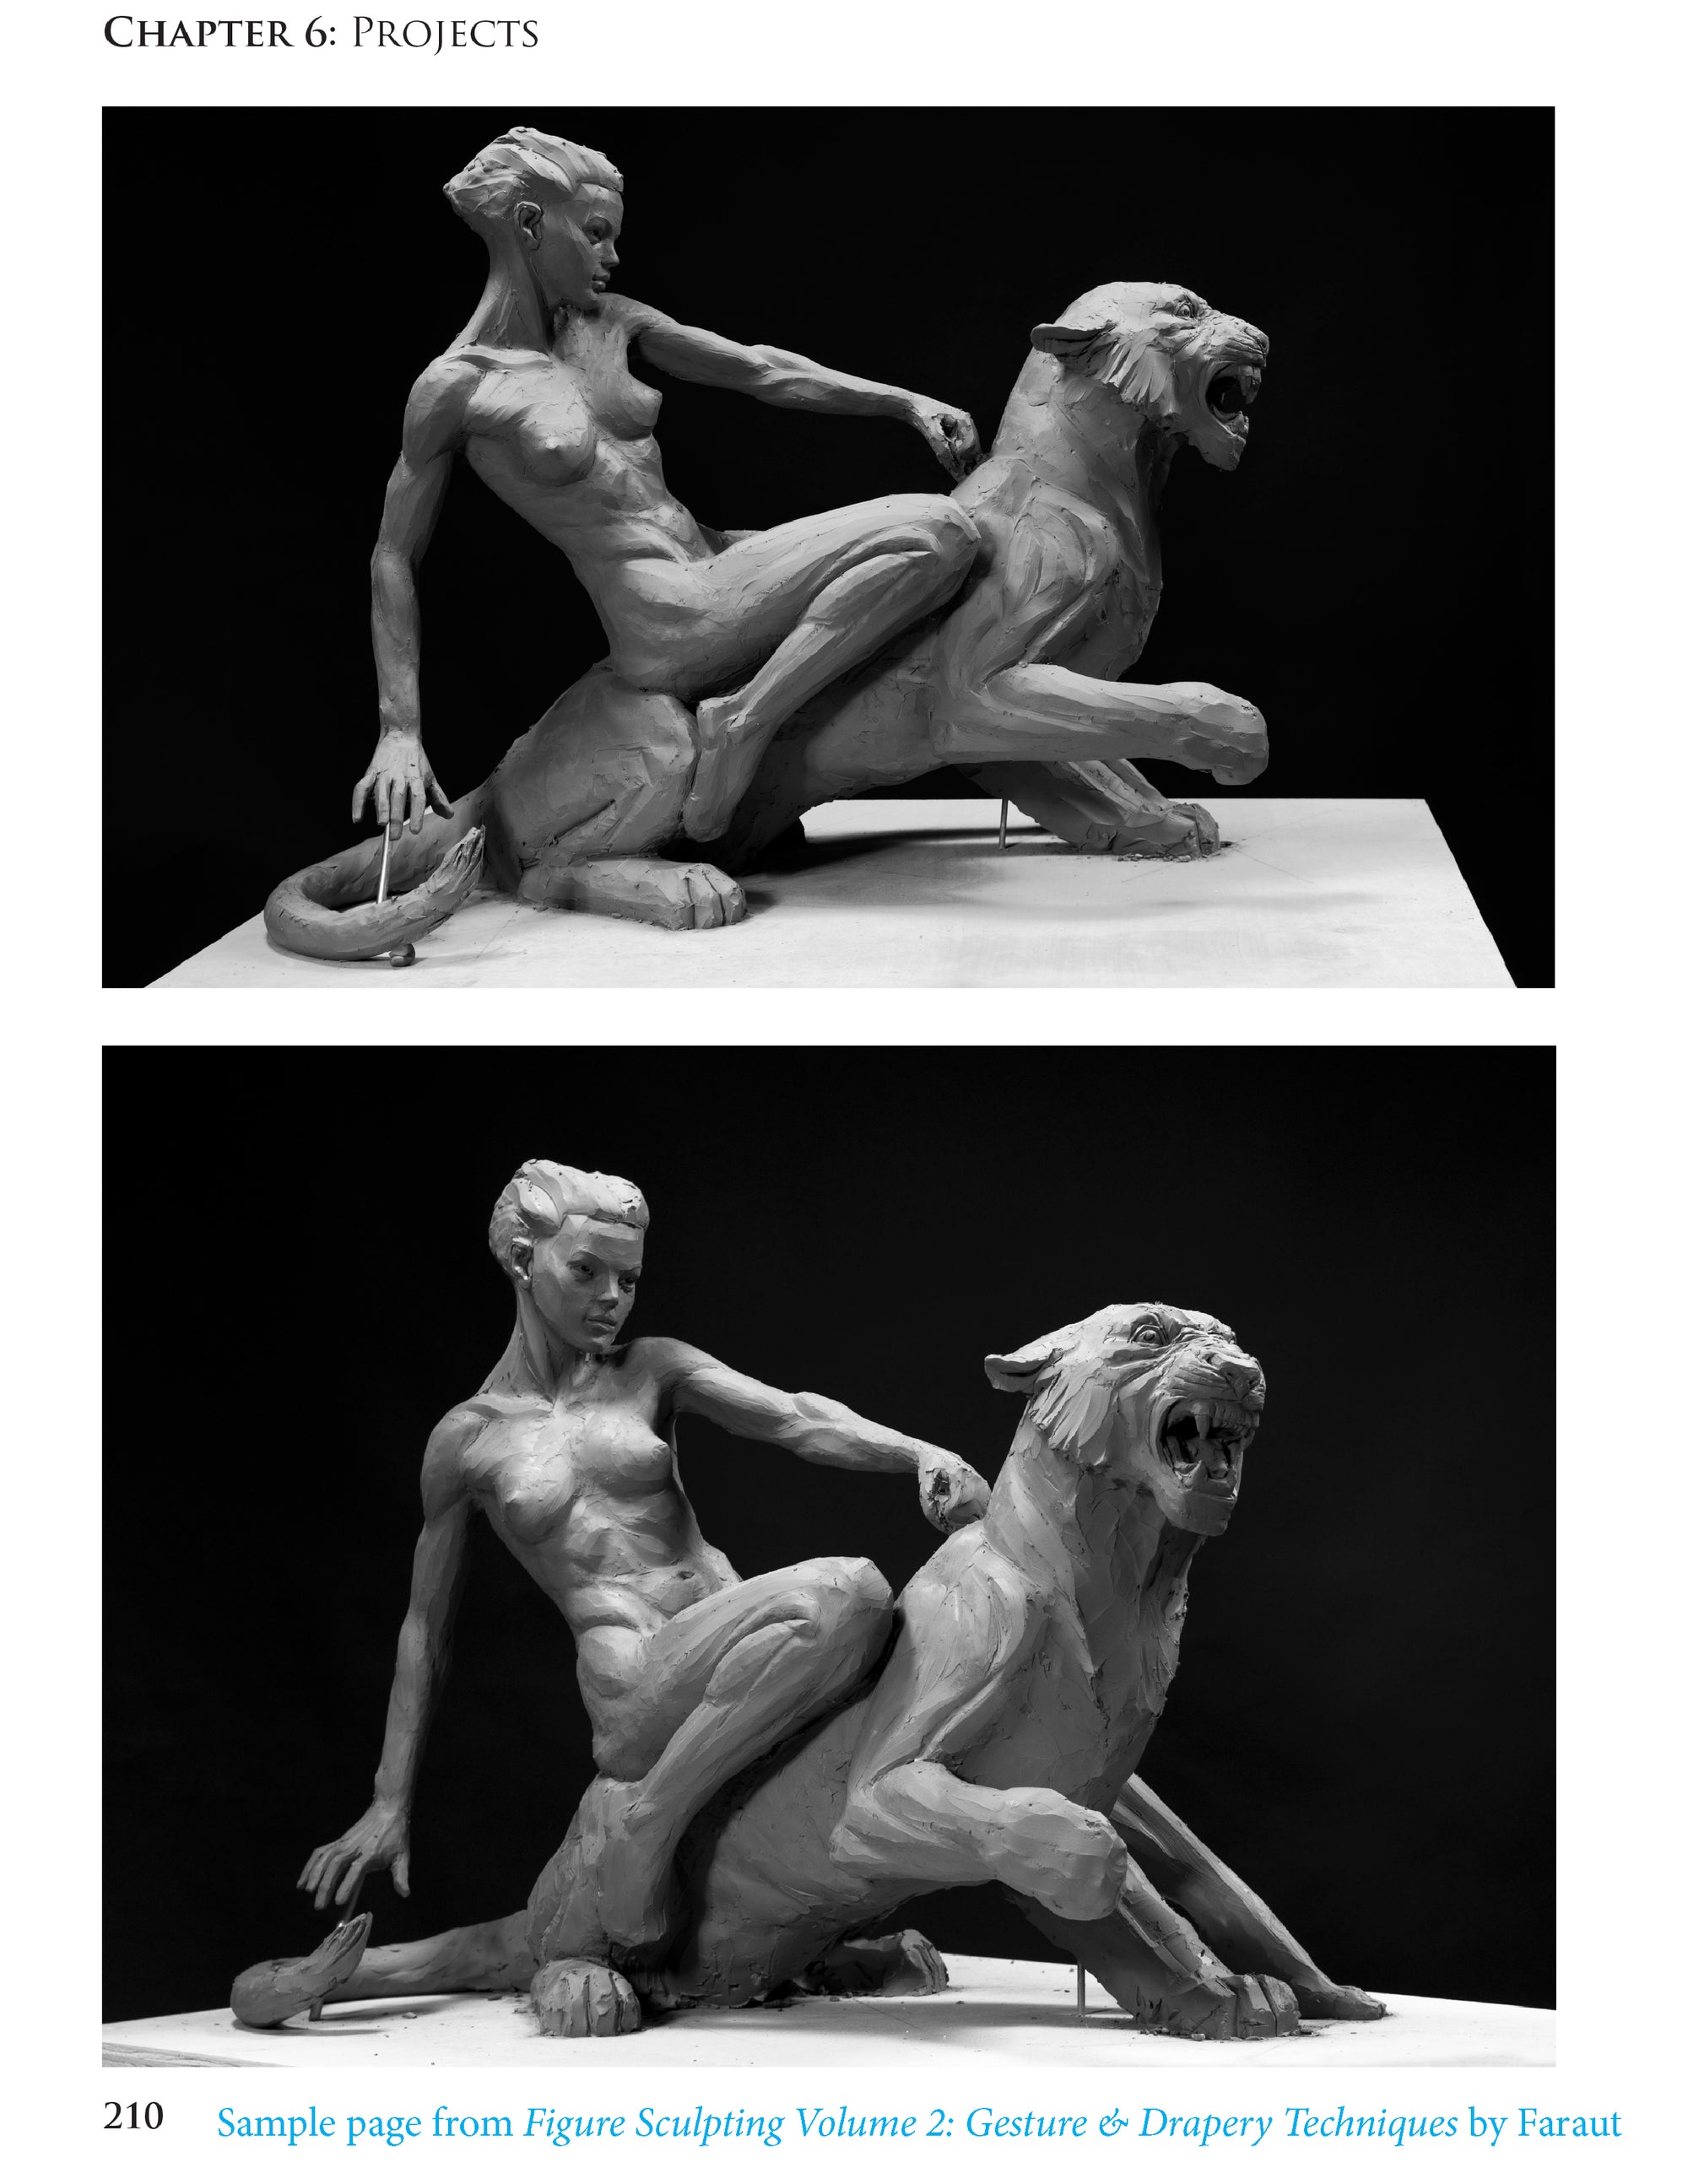  Sample page from book: Figure Sculpting Volume 2 by Faraut showing female figure in planes